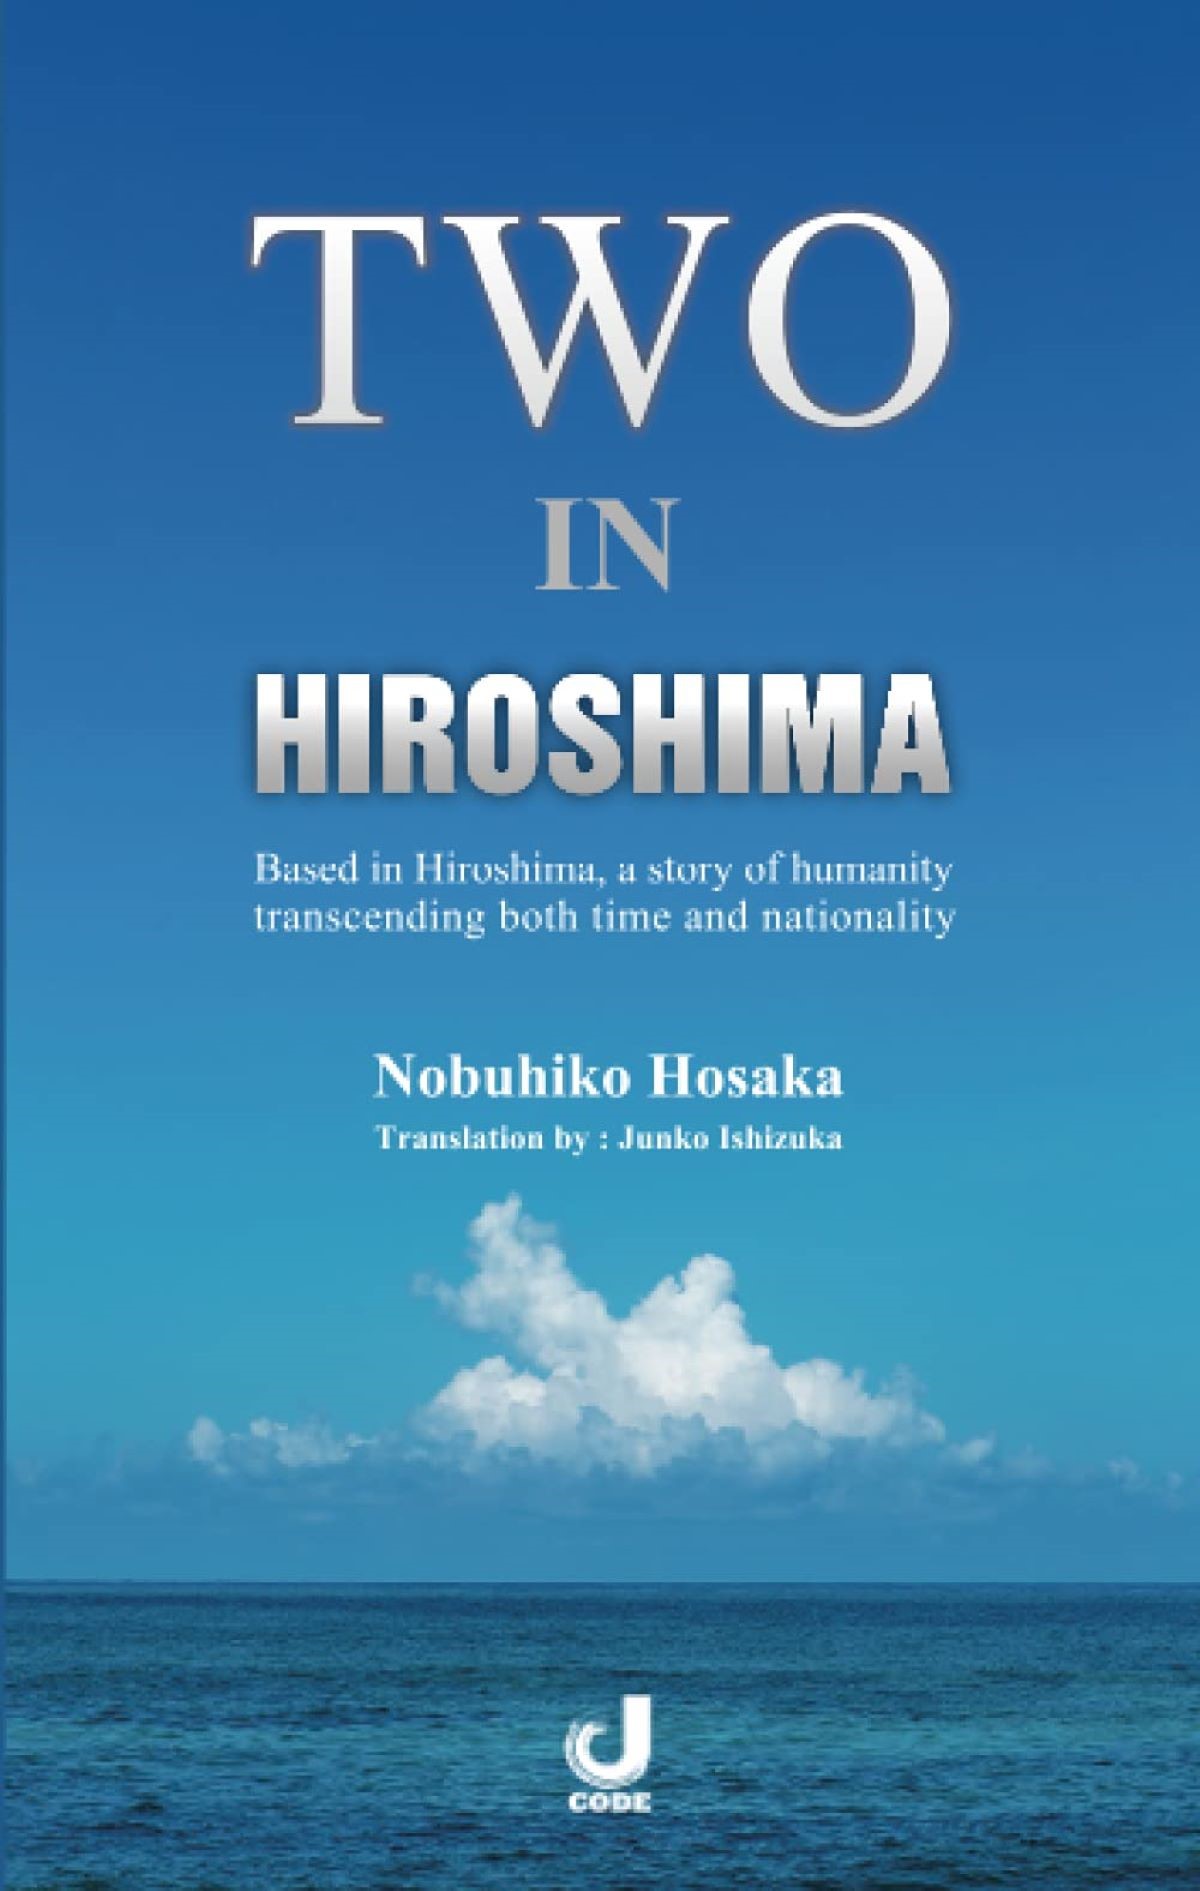 Two in Hiroshima book cover rr